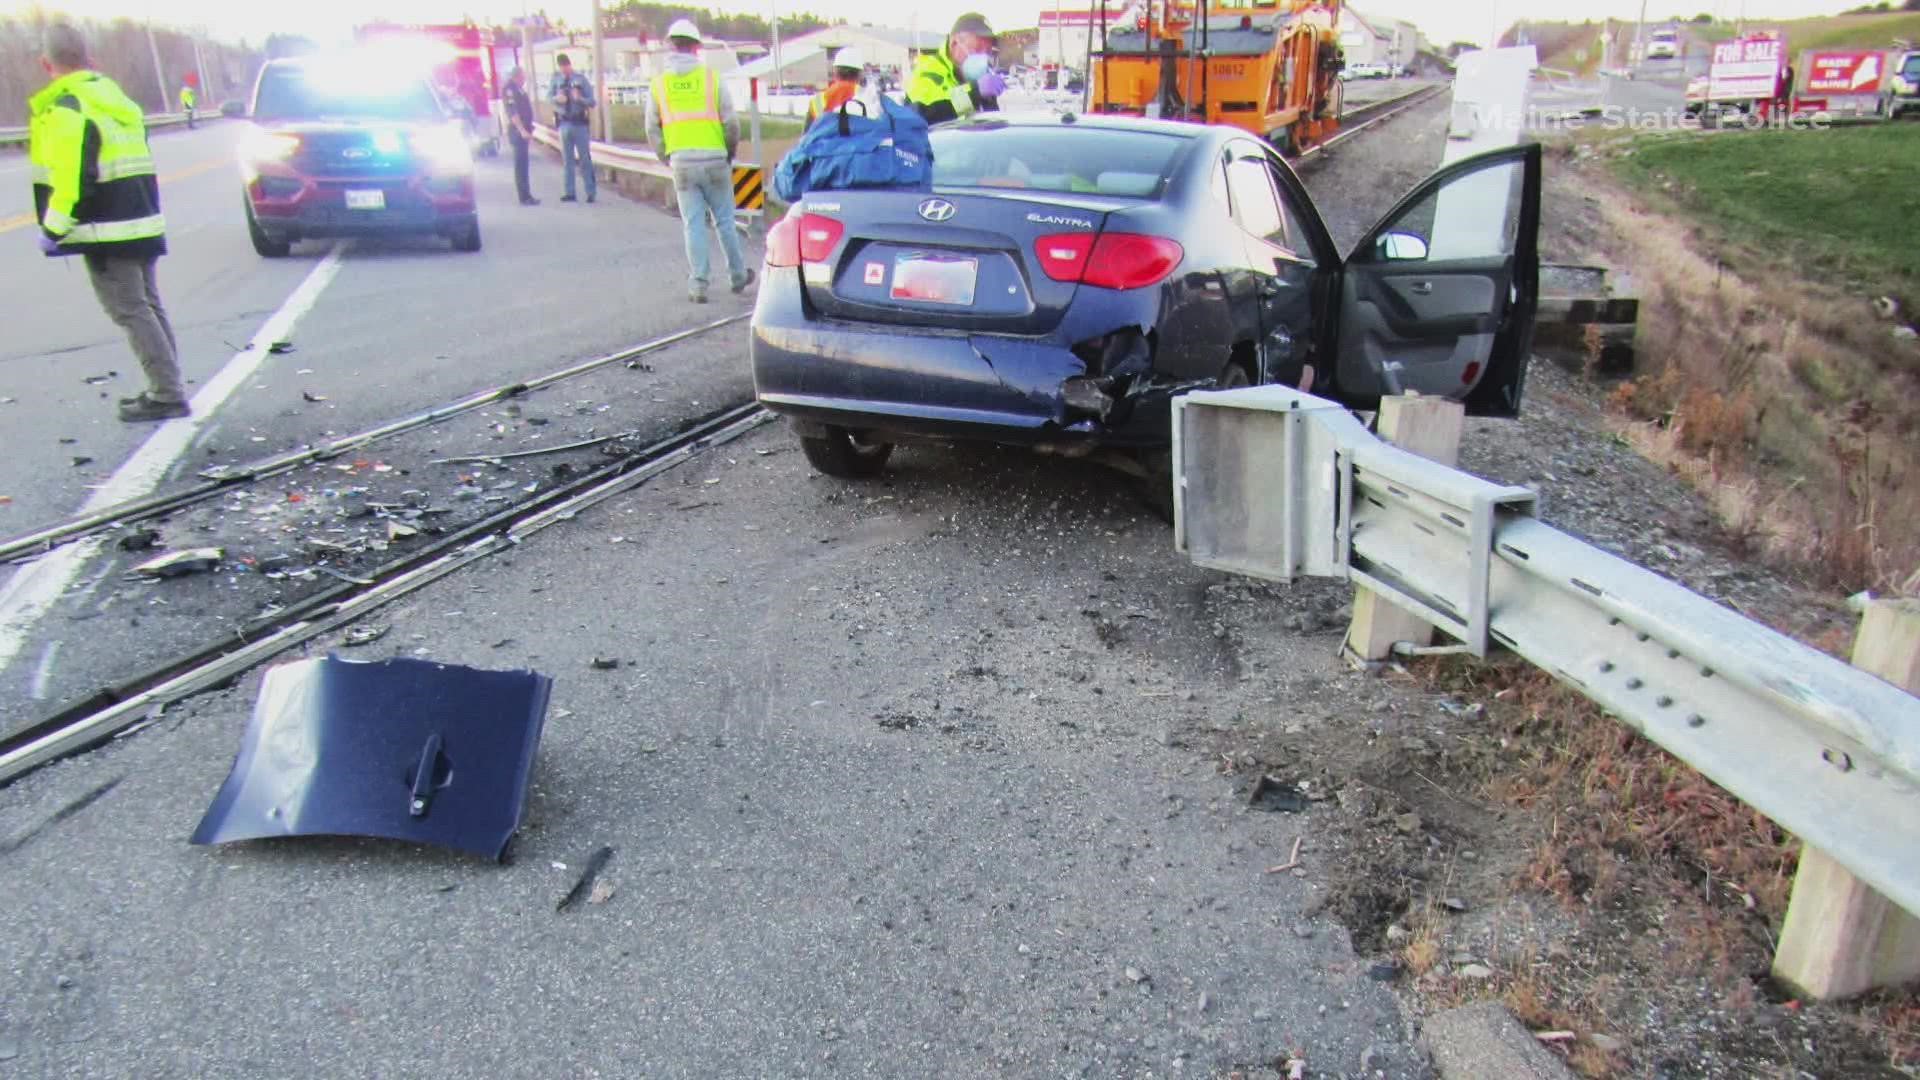 The crash occurred Thursday morning on tracks crossing Augusta Road in the area of Route 27.